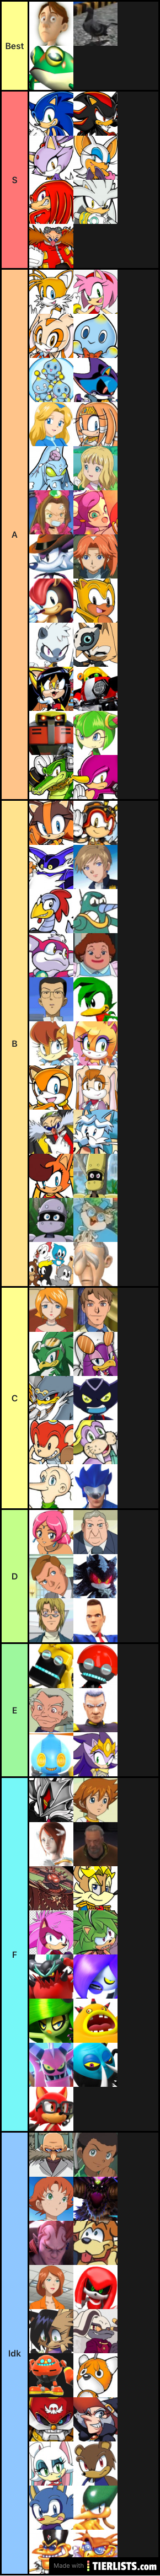 Sonic characters